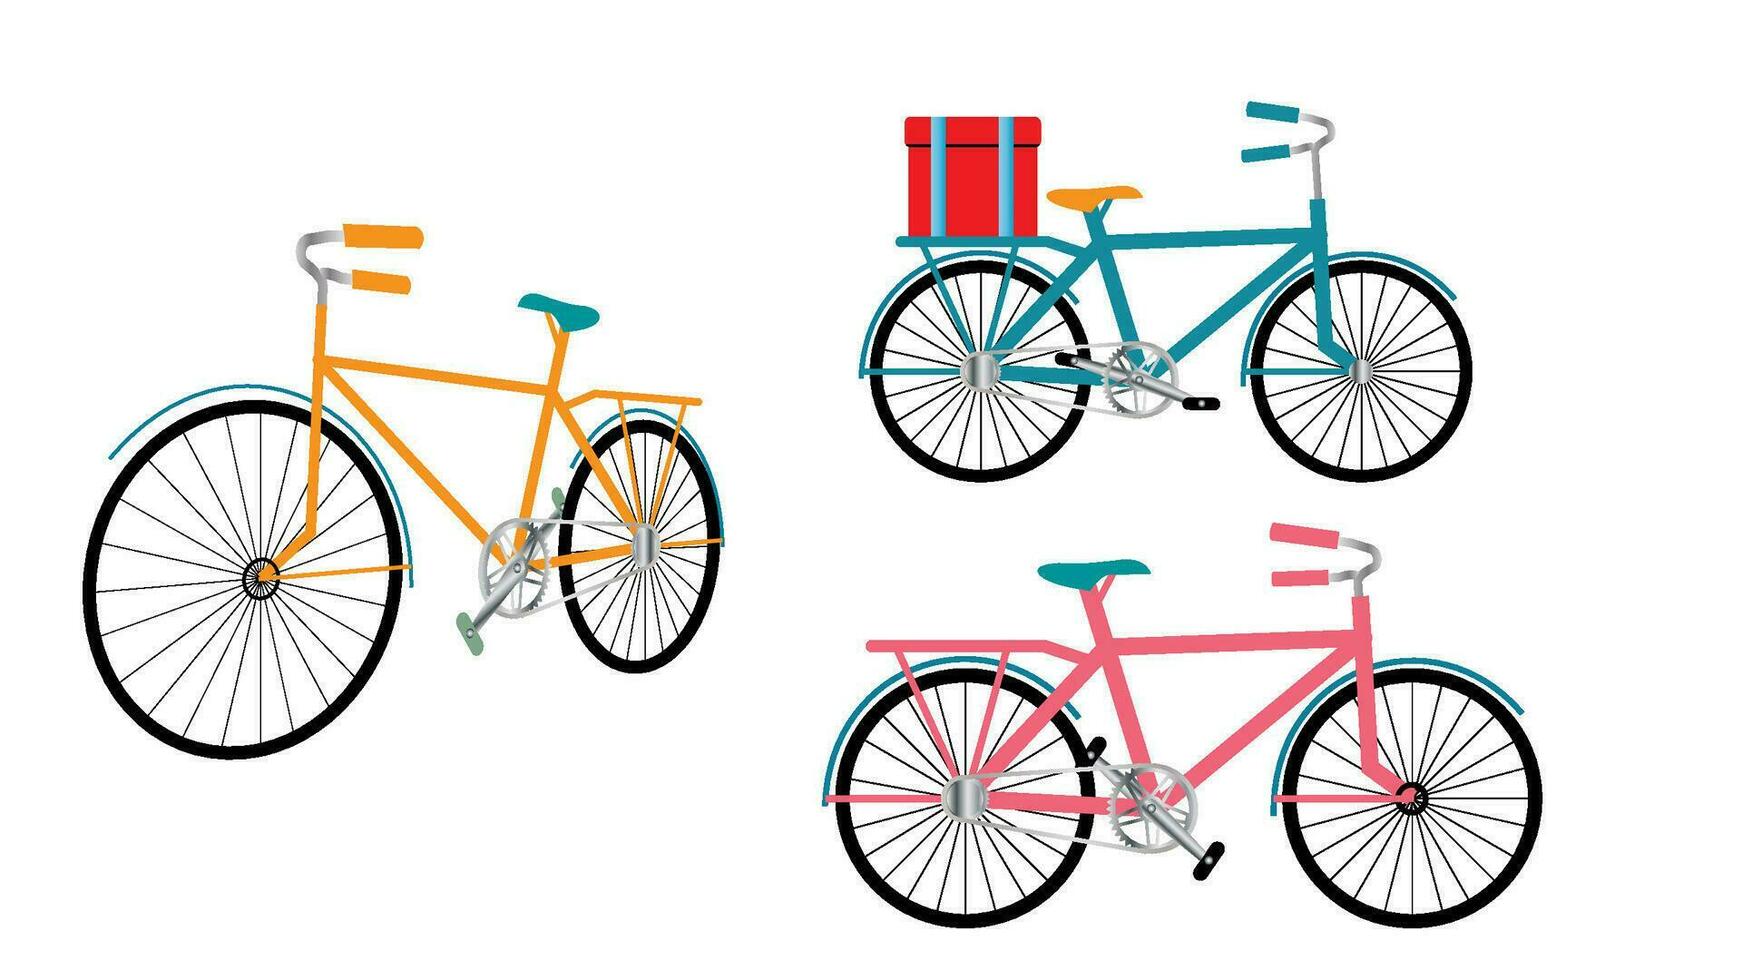 Bicycle vector drawing on a transparent background for use in design work.